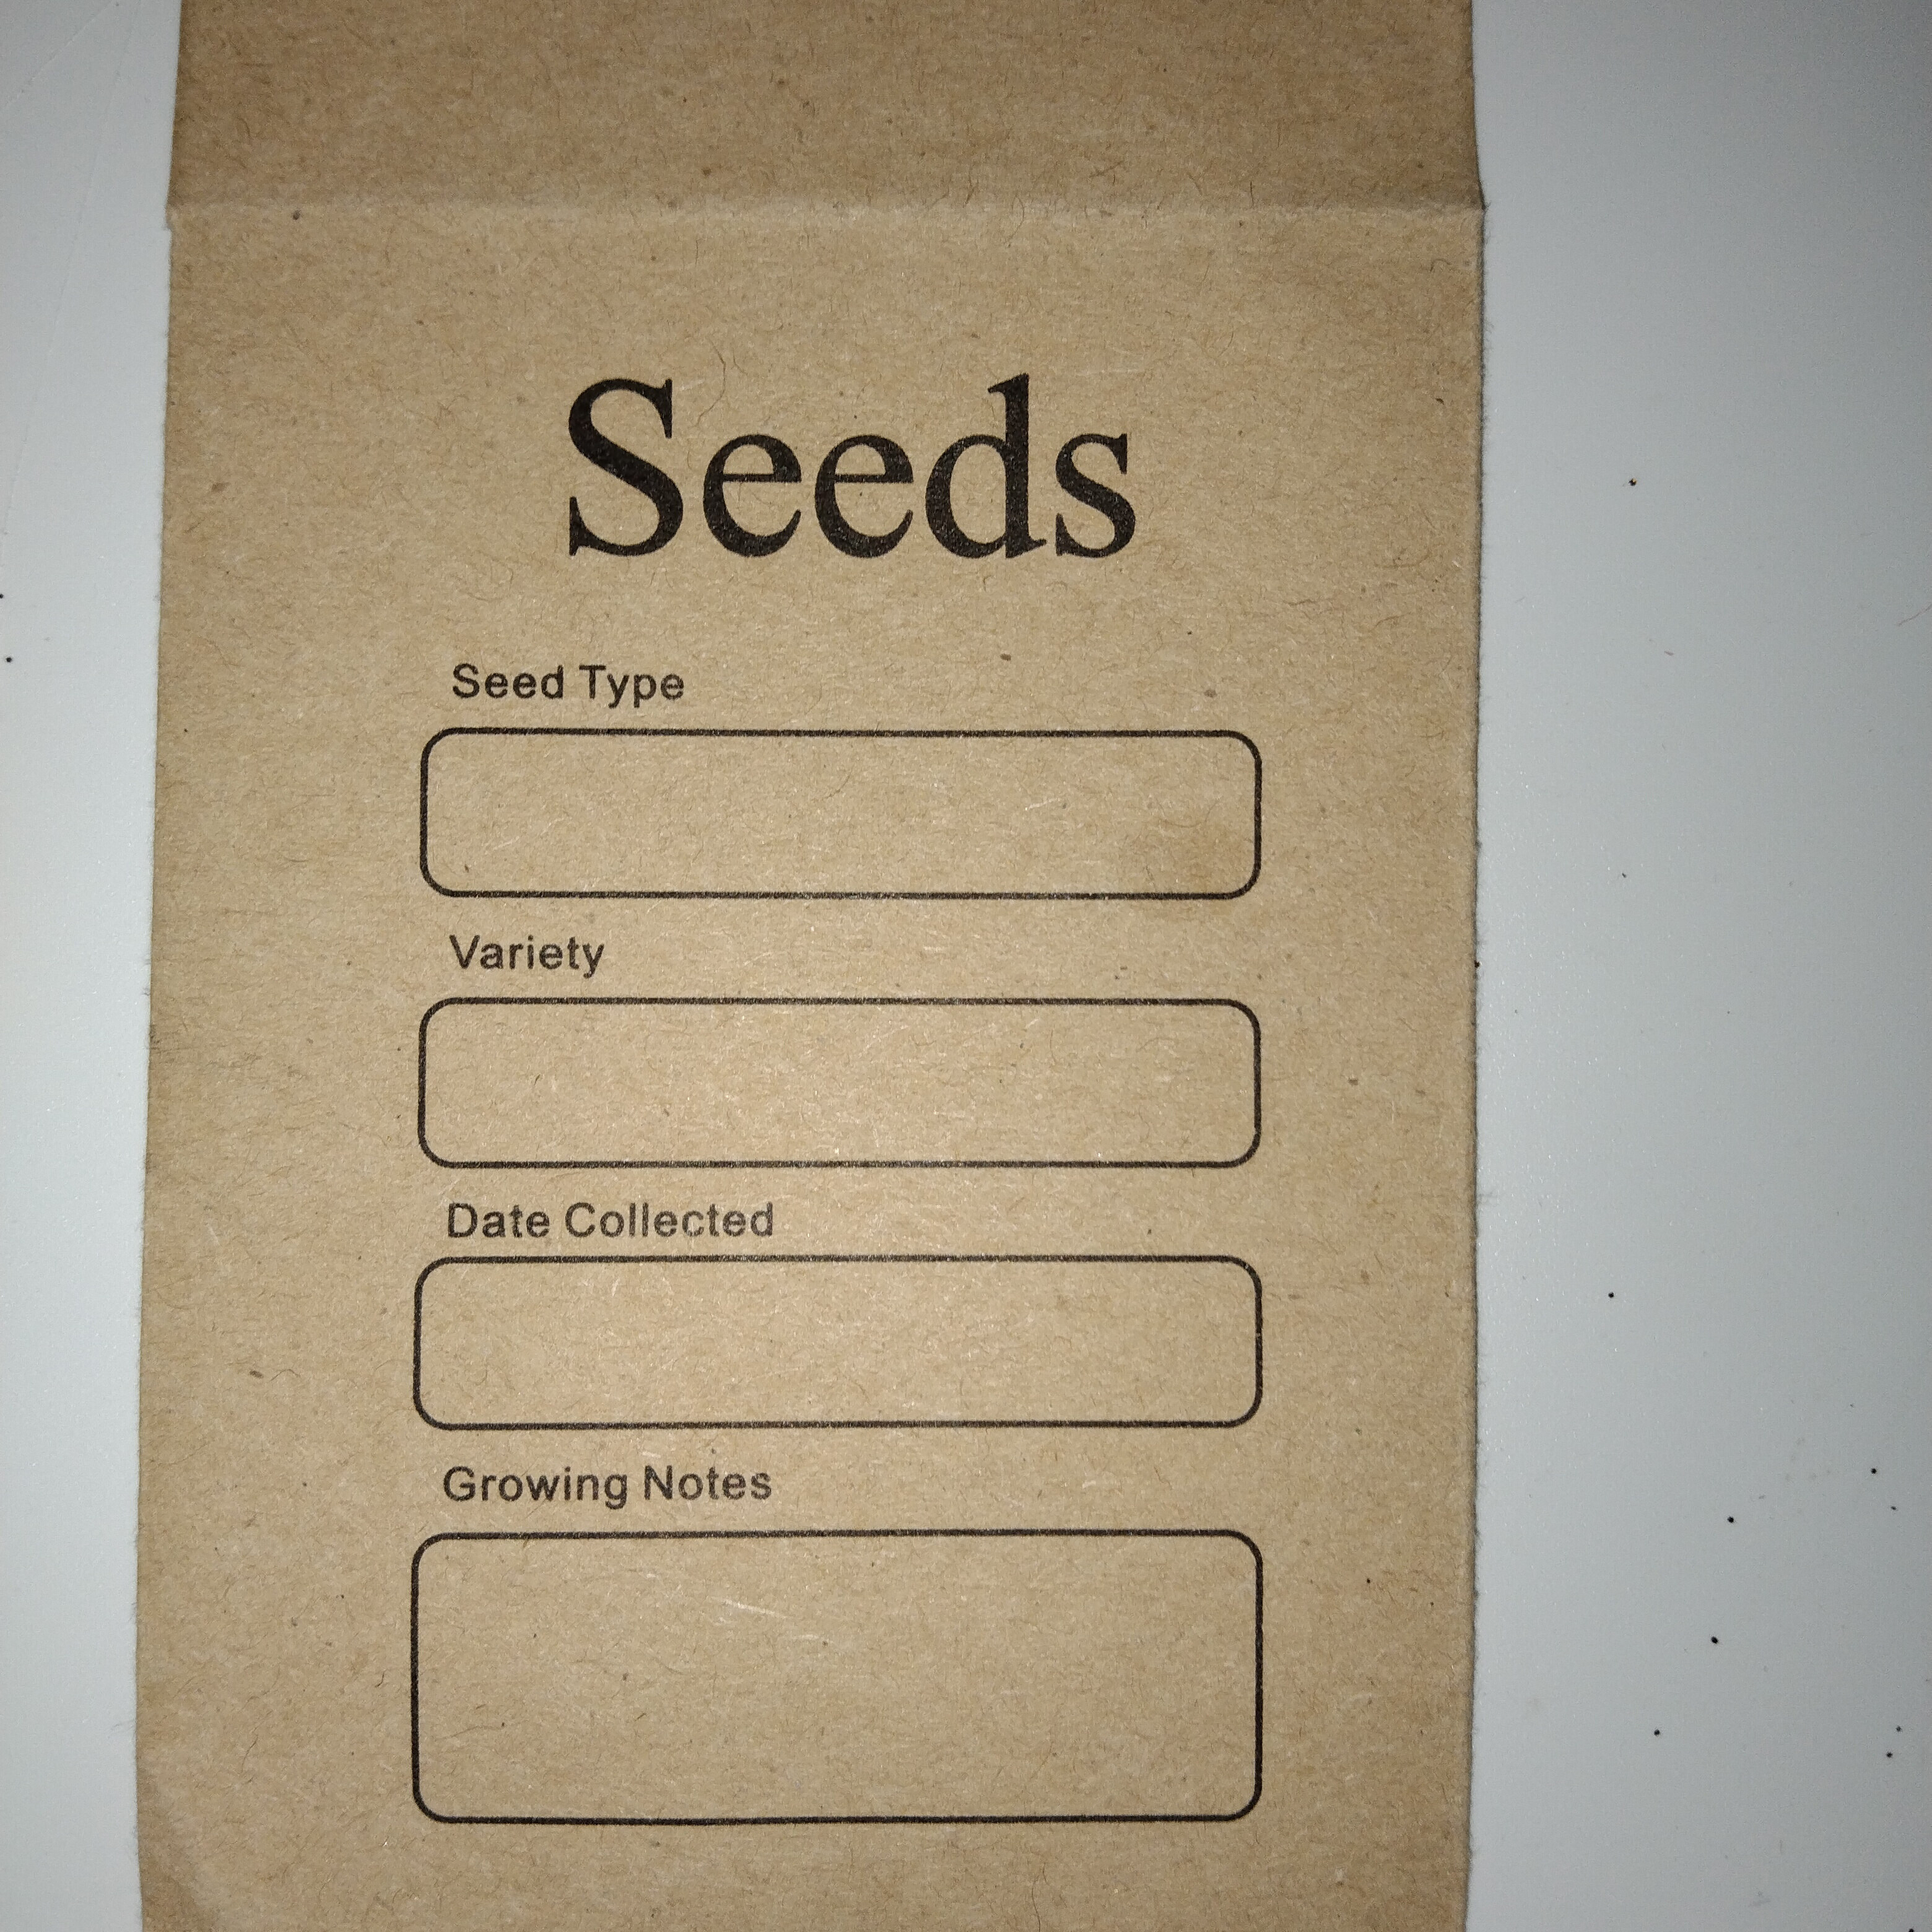 200pcs Seed Envelopes, Reusable Self Sealing Seed Storage Paper Bag Printed with Types Name Template Small Seed Packets for Seeds Saving & Collecting